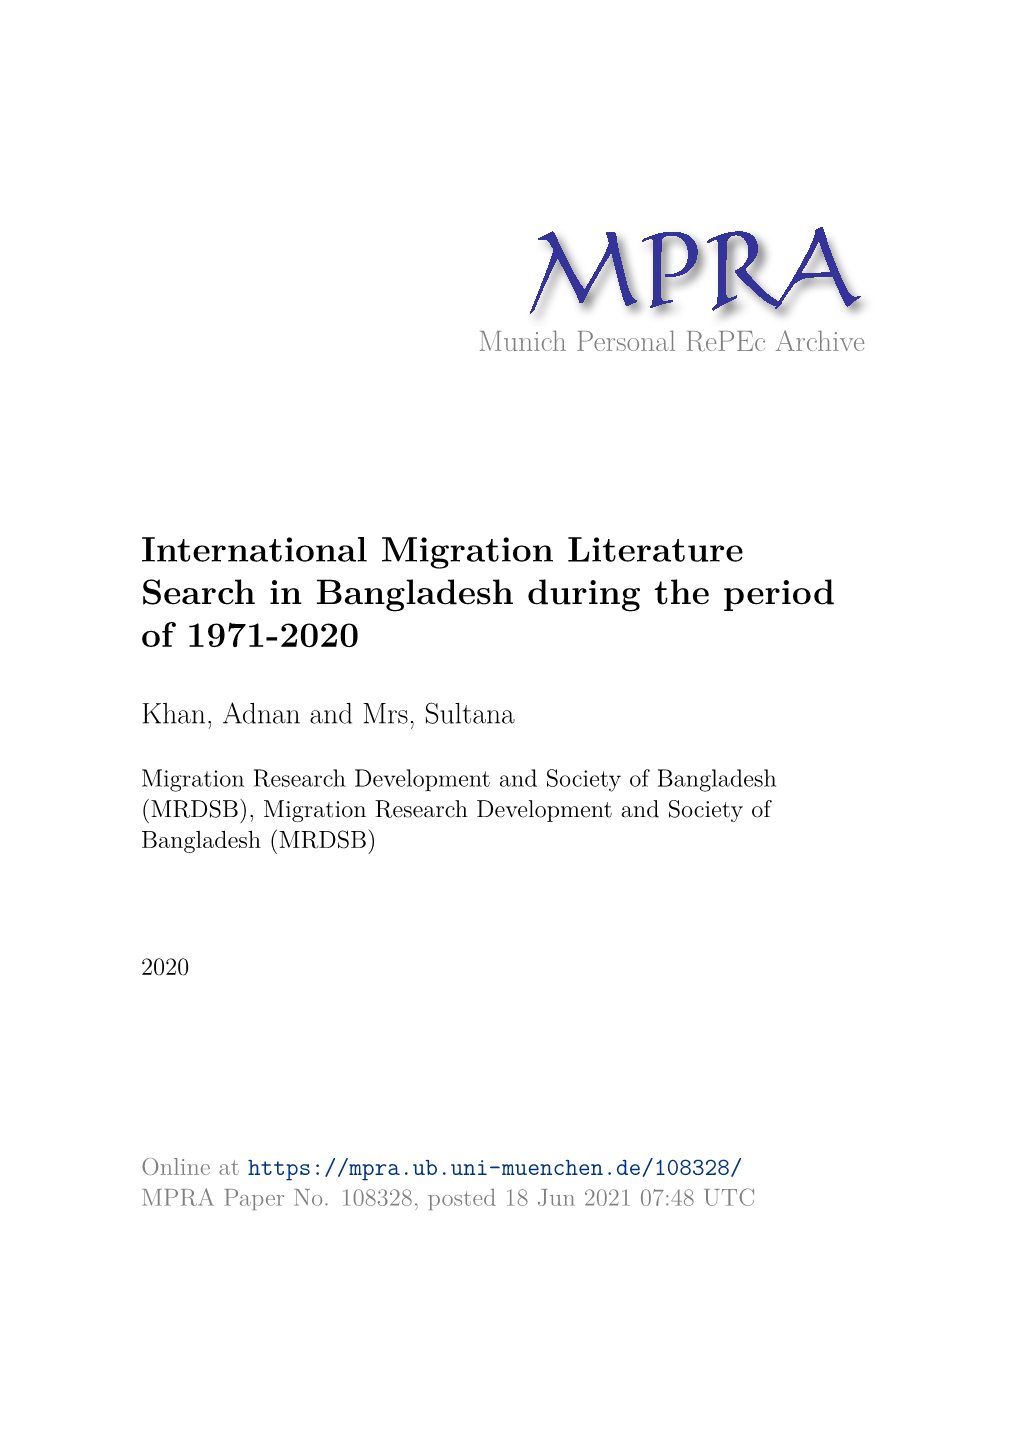 International Migration Literature Search in Bangladesh During the Period of 1971-2020